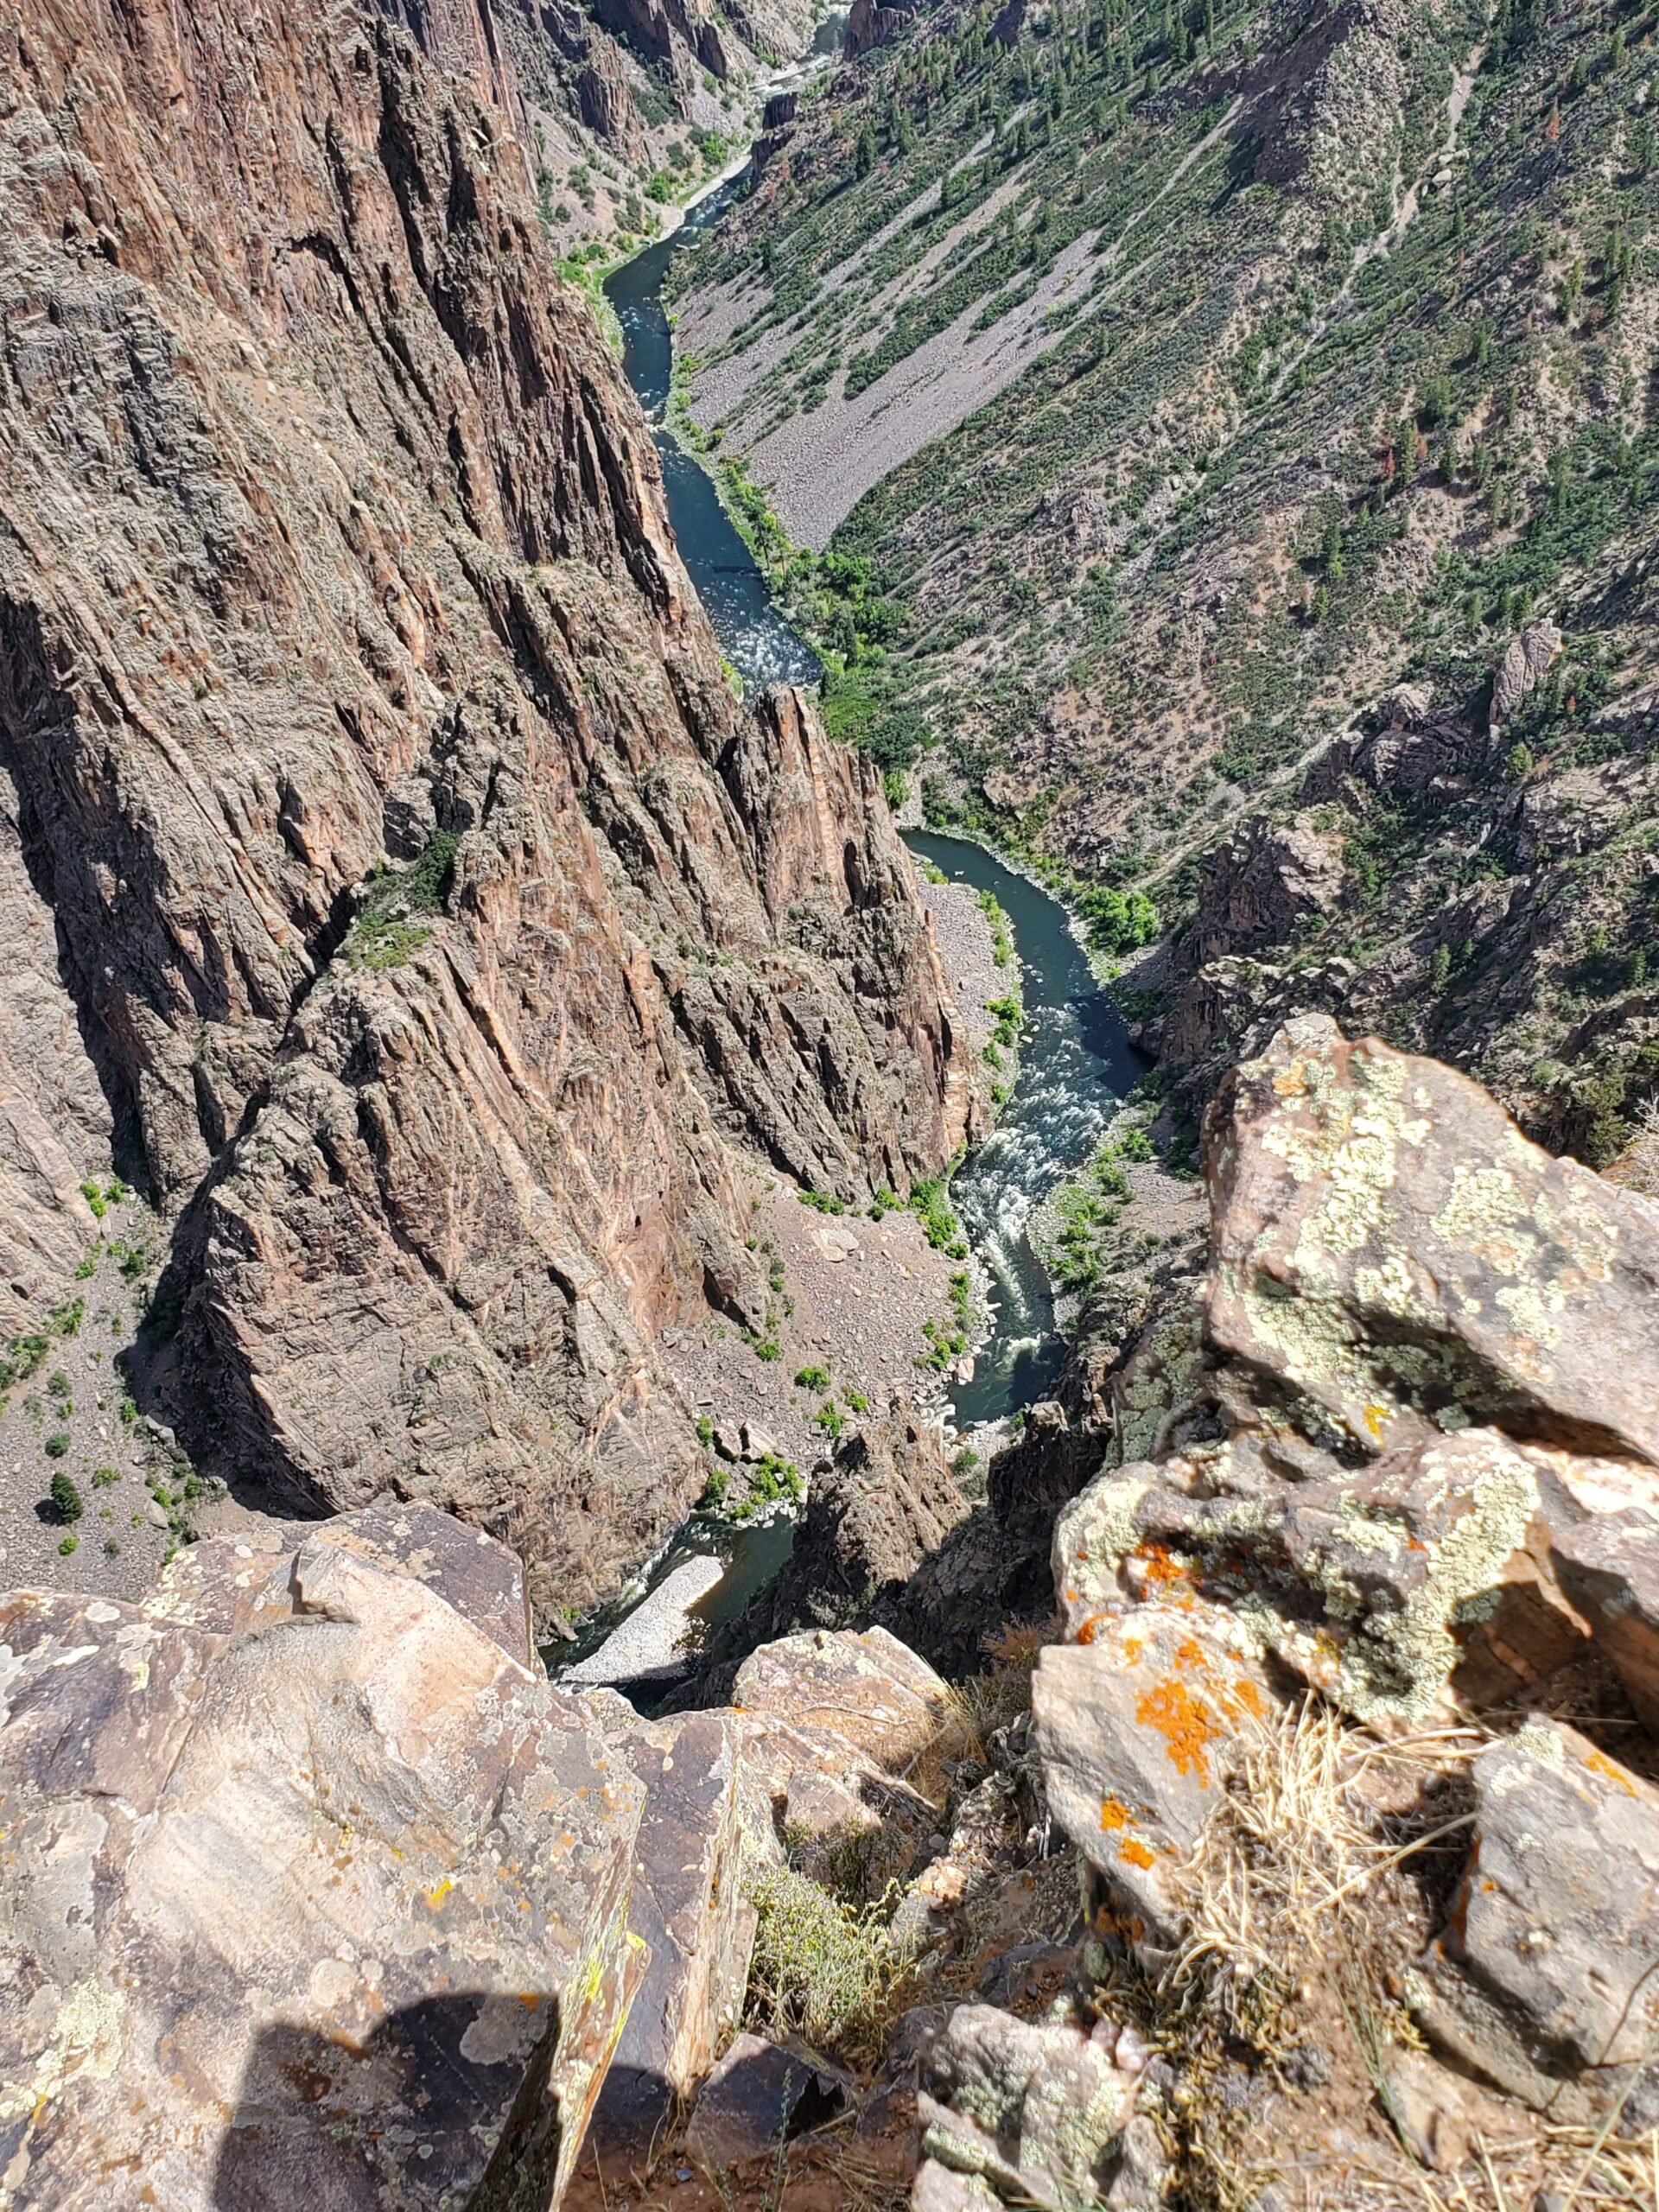 View from Black Canyon of the Gunnison N.P.